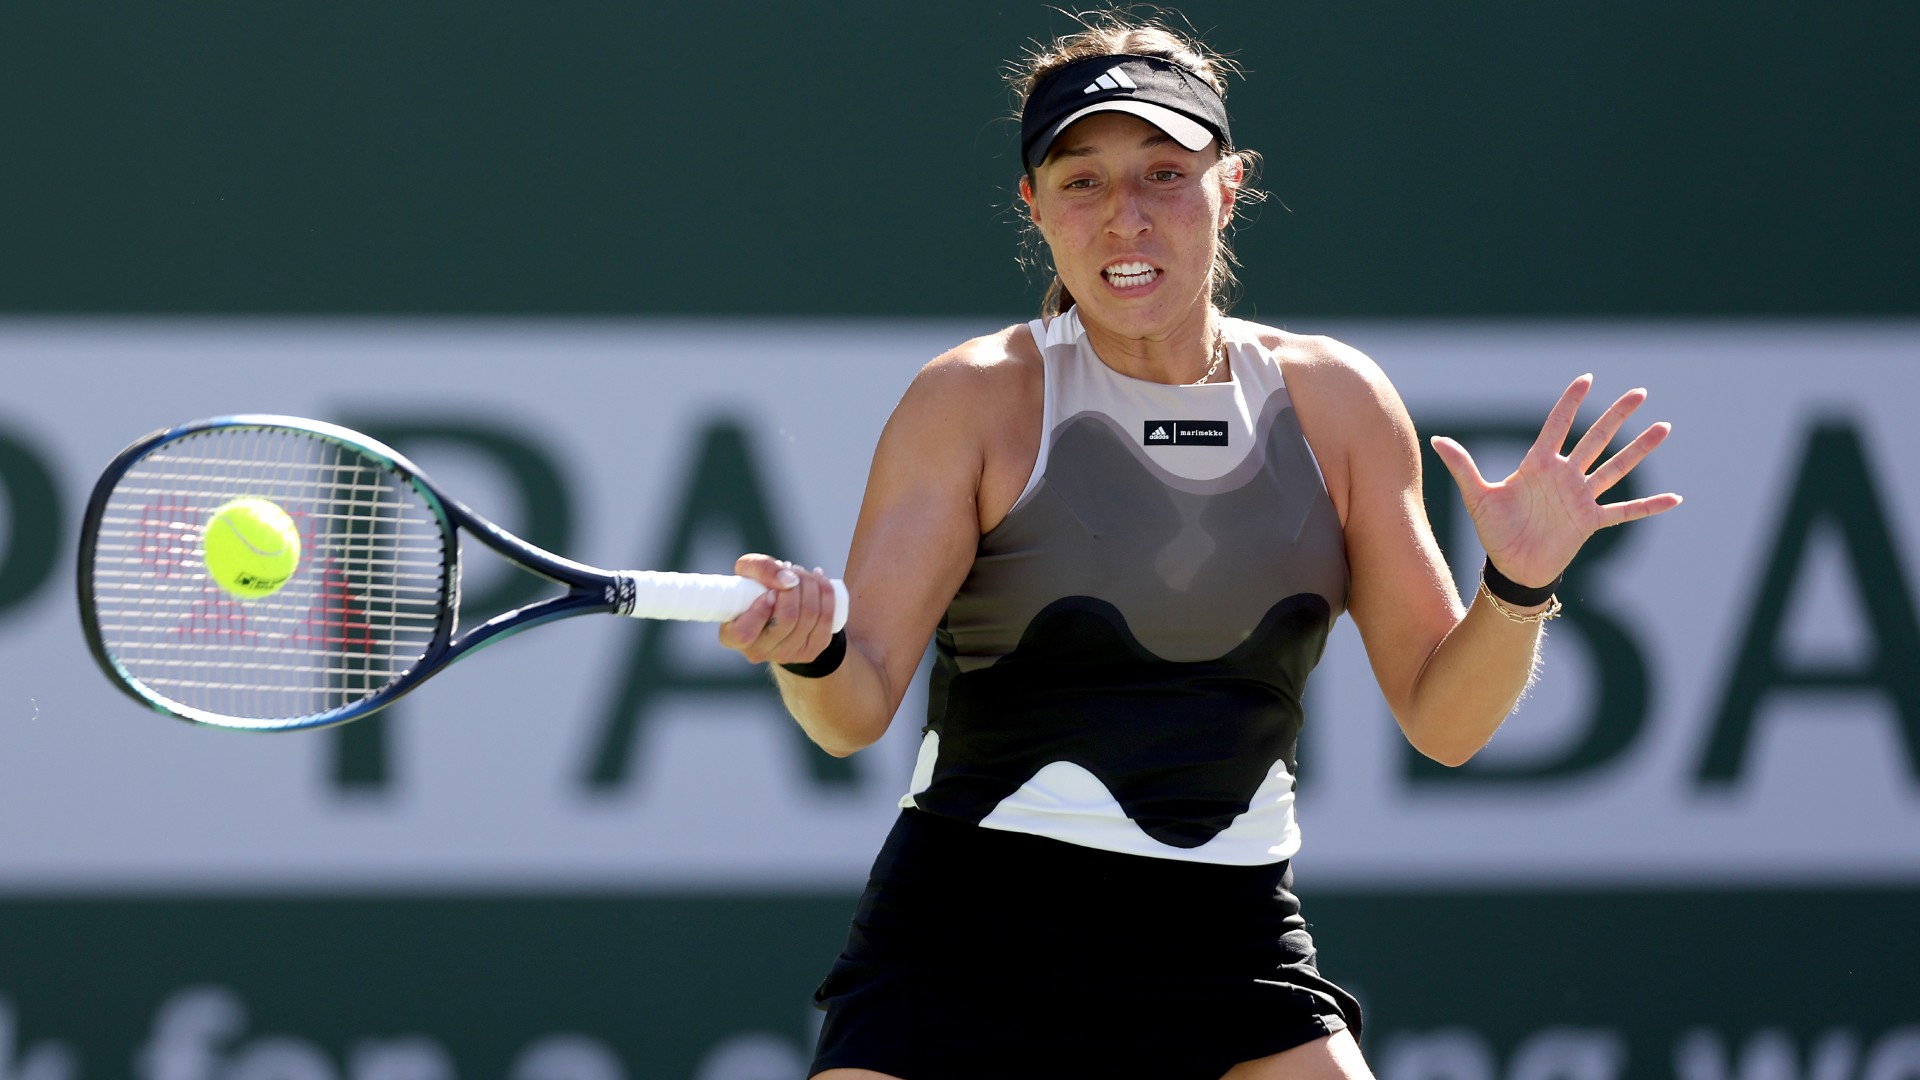 Pegula secures comeback win at Indian Wells beIN SPORTS